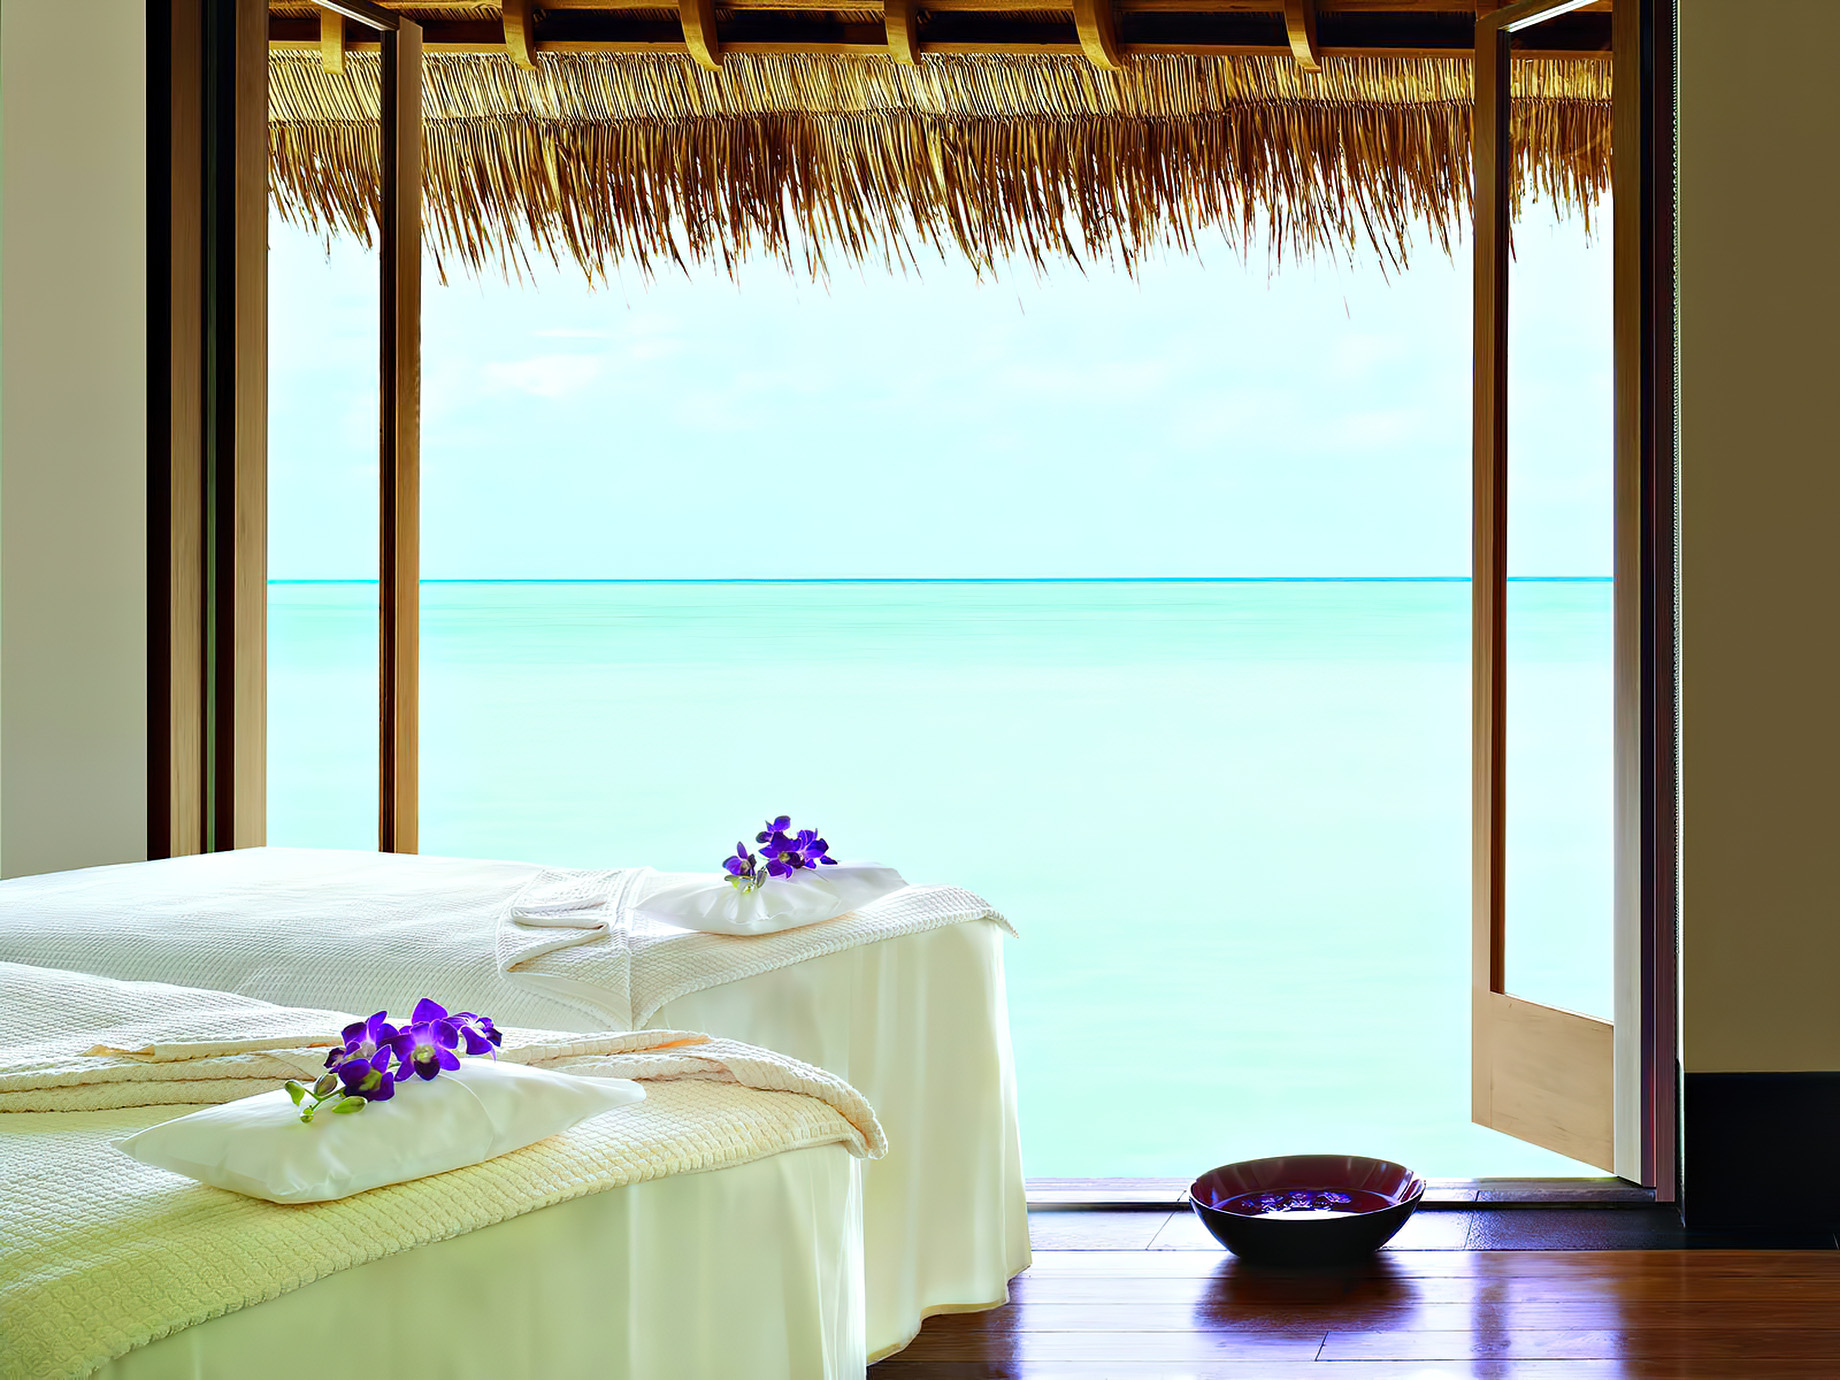 One&Only Reethi Rah Resort – North Male Atoll, Maldives – Wellness Spa Double Treatment Room